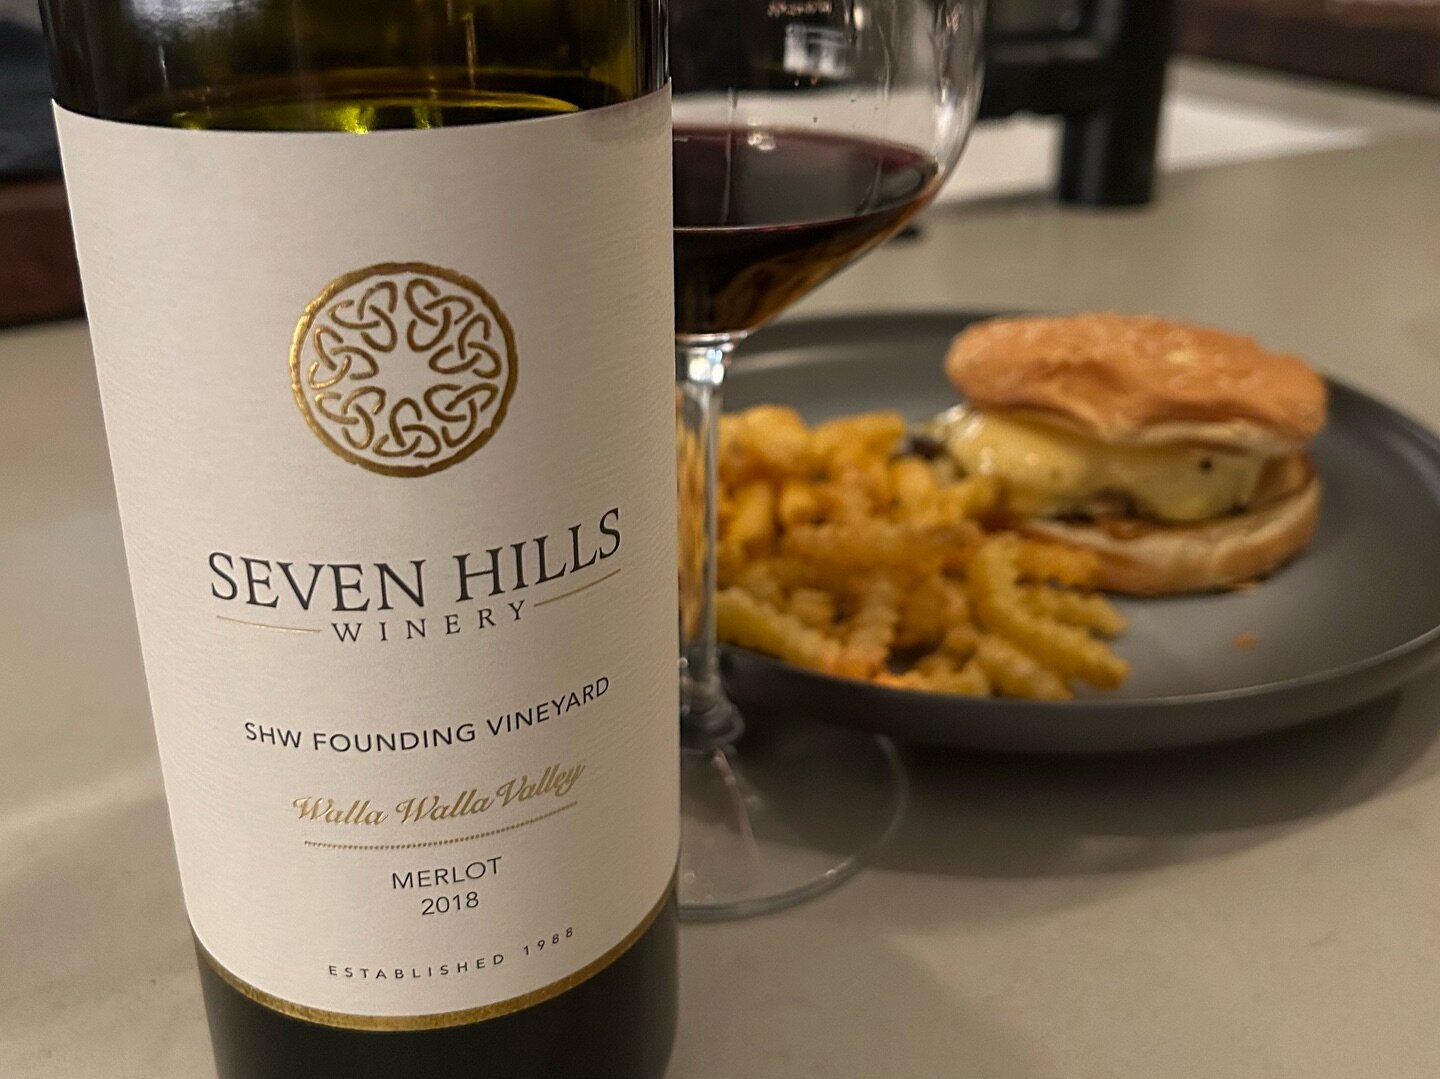 Appreciating the bounty of Eastern Washington this weekend with a favorite Walla Walla Valley single vineyard Merlot from @sevenhillswinery_1988 paired with smash burgers made with Murray Grey beef raised by @rebecca.dekleine. Very much looking forwa